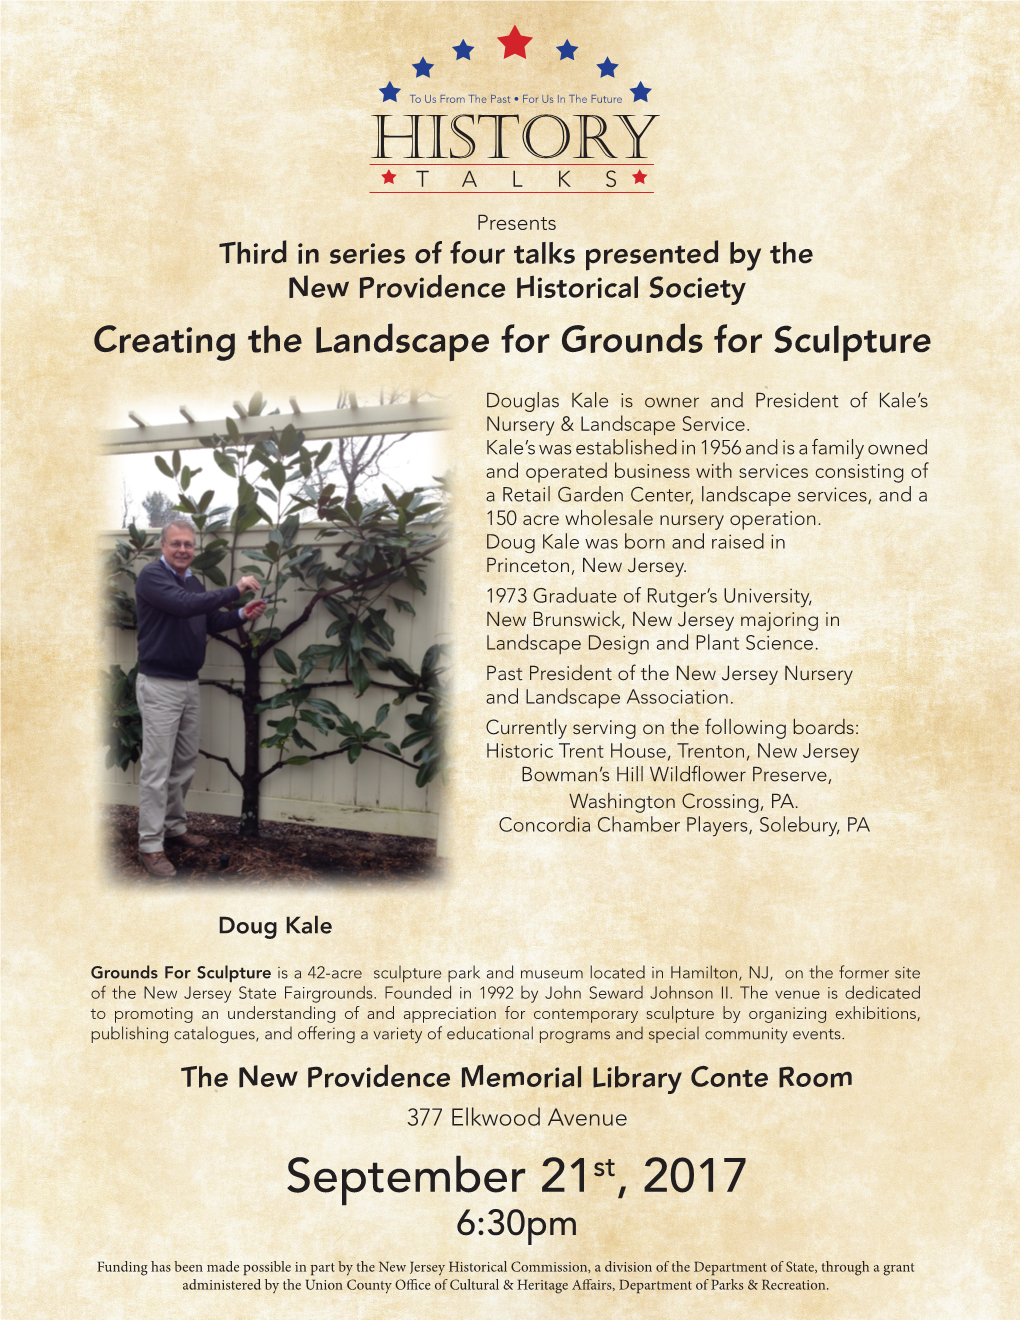 “Ground for Sculpture” History Talk